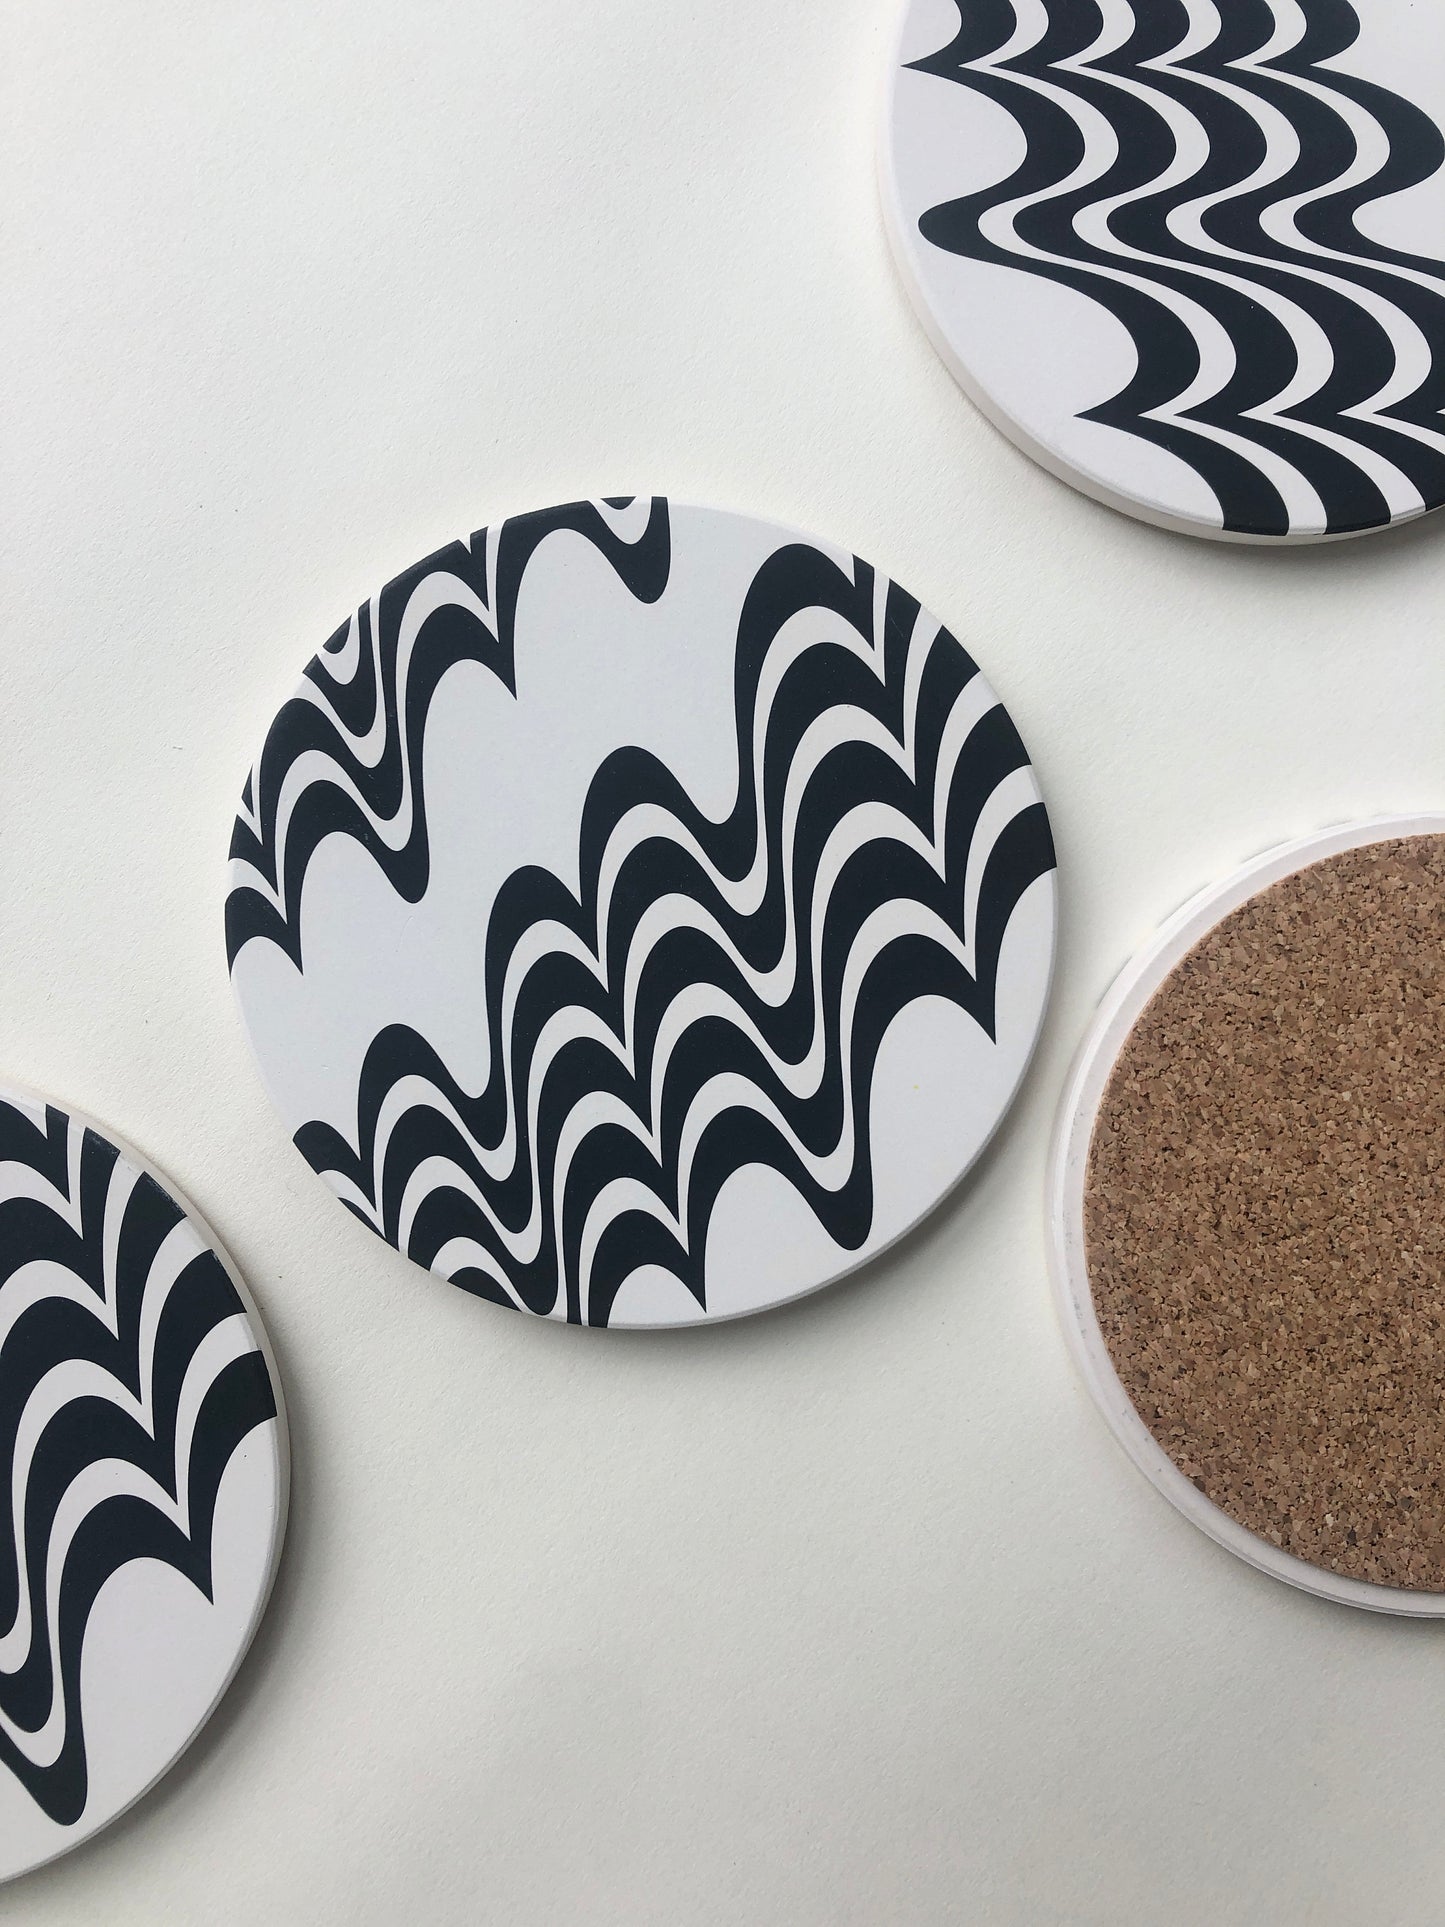 SQUIGGLE COASTERS set of 4 ceramic absorbent coasters